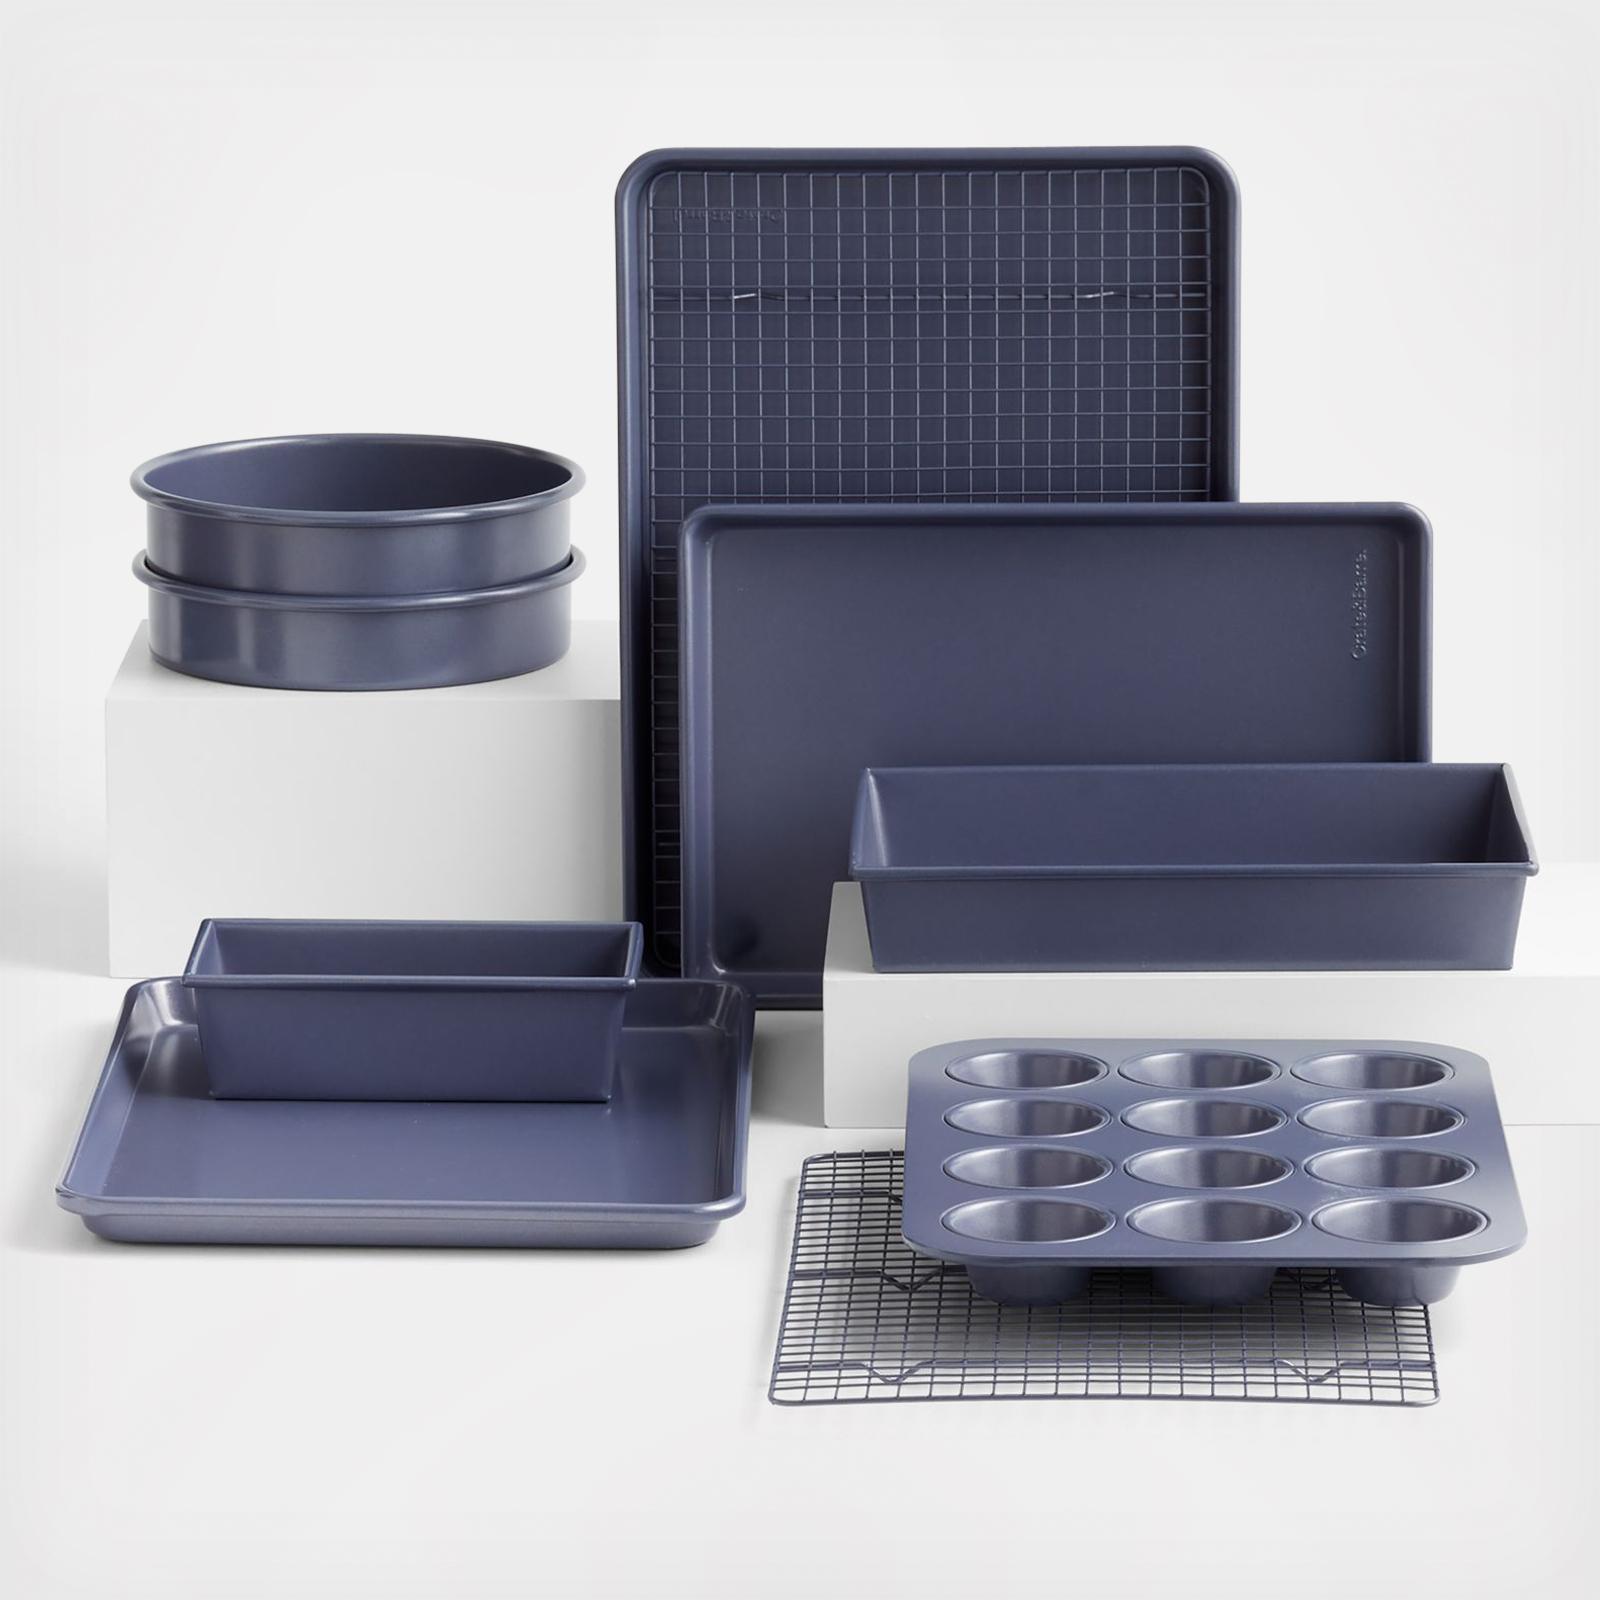 Crate & Barrel Slate Blue 12-Cup Muffin Pan + Reviews